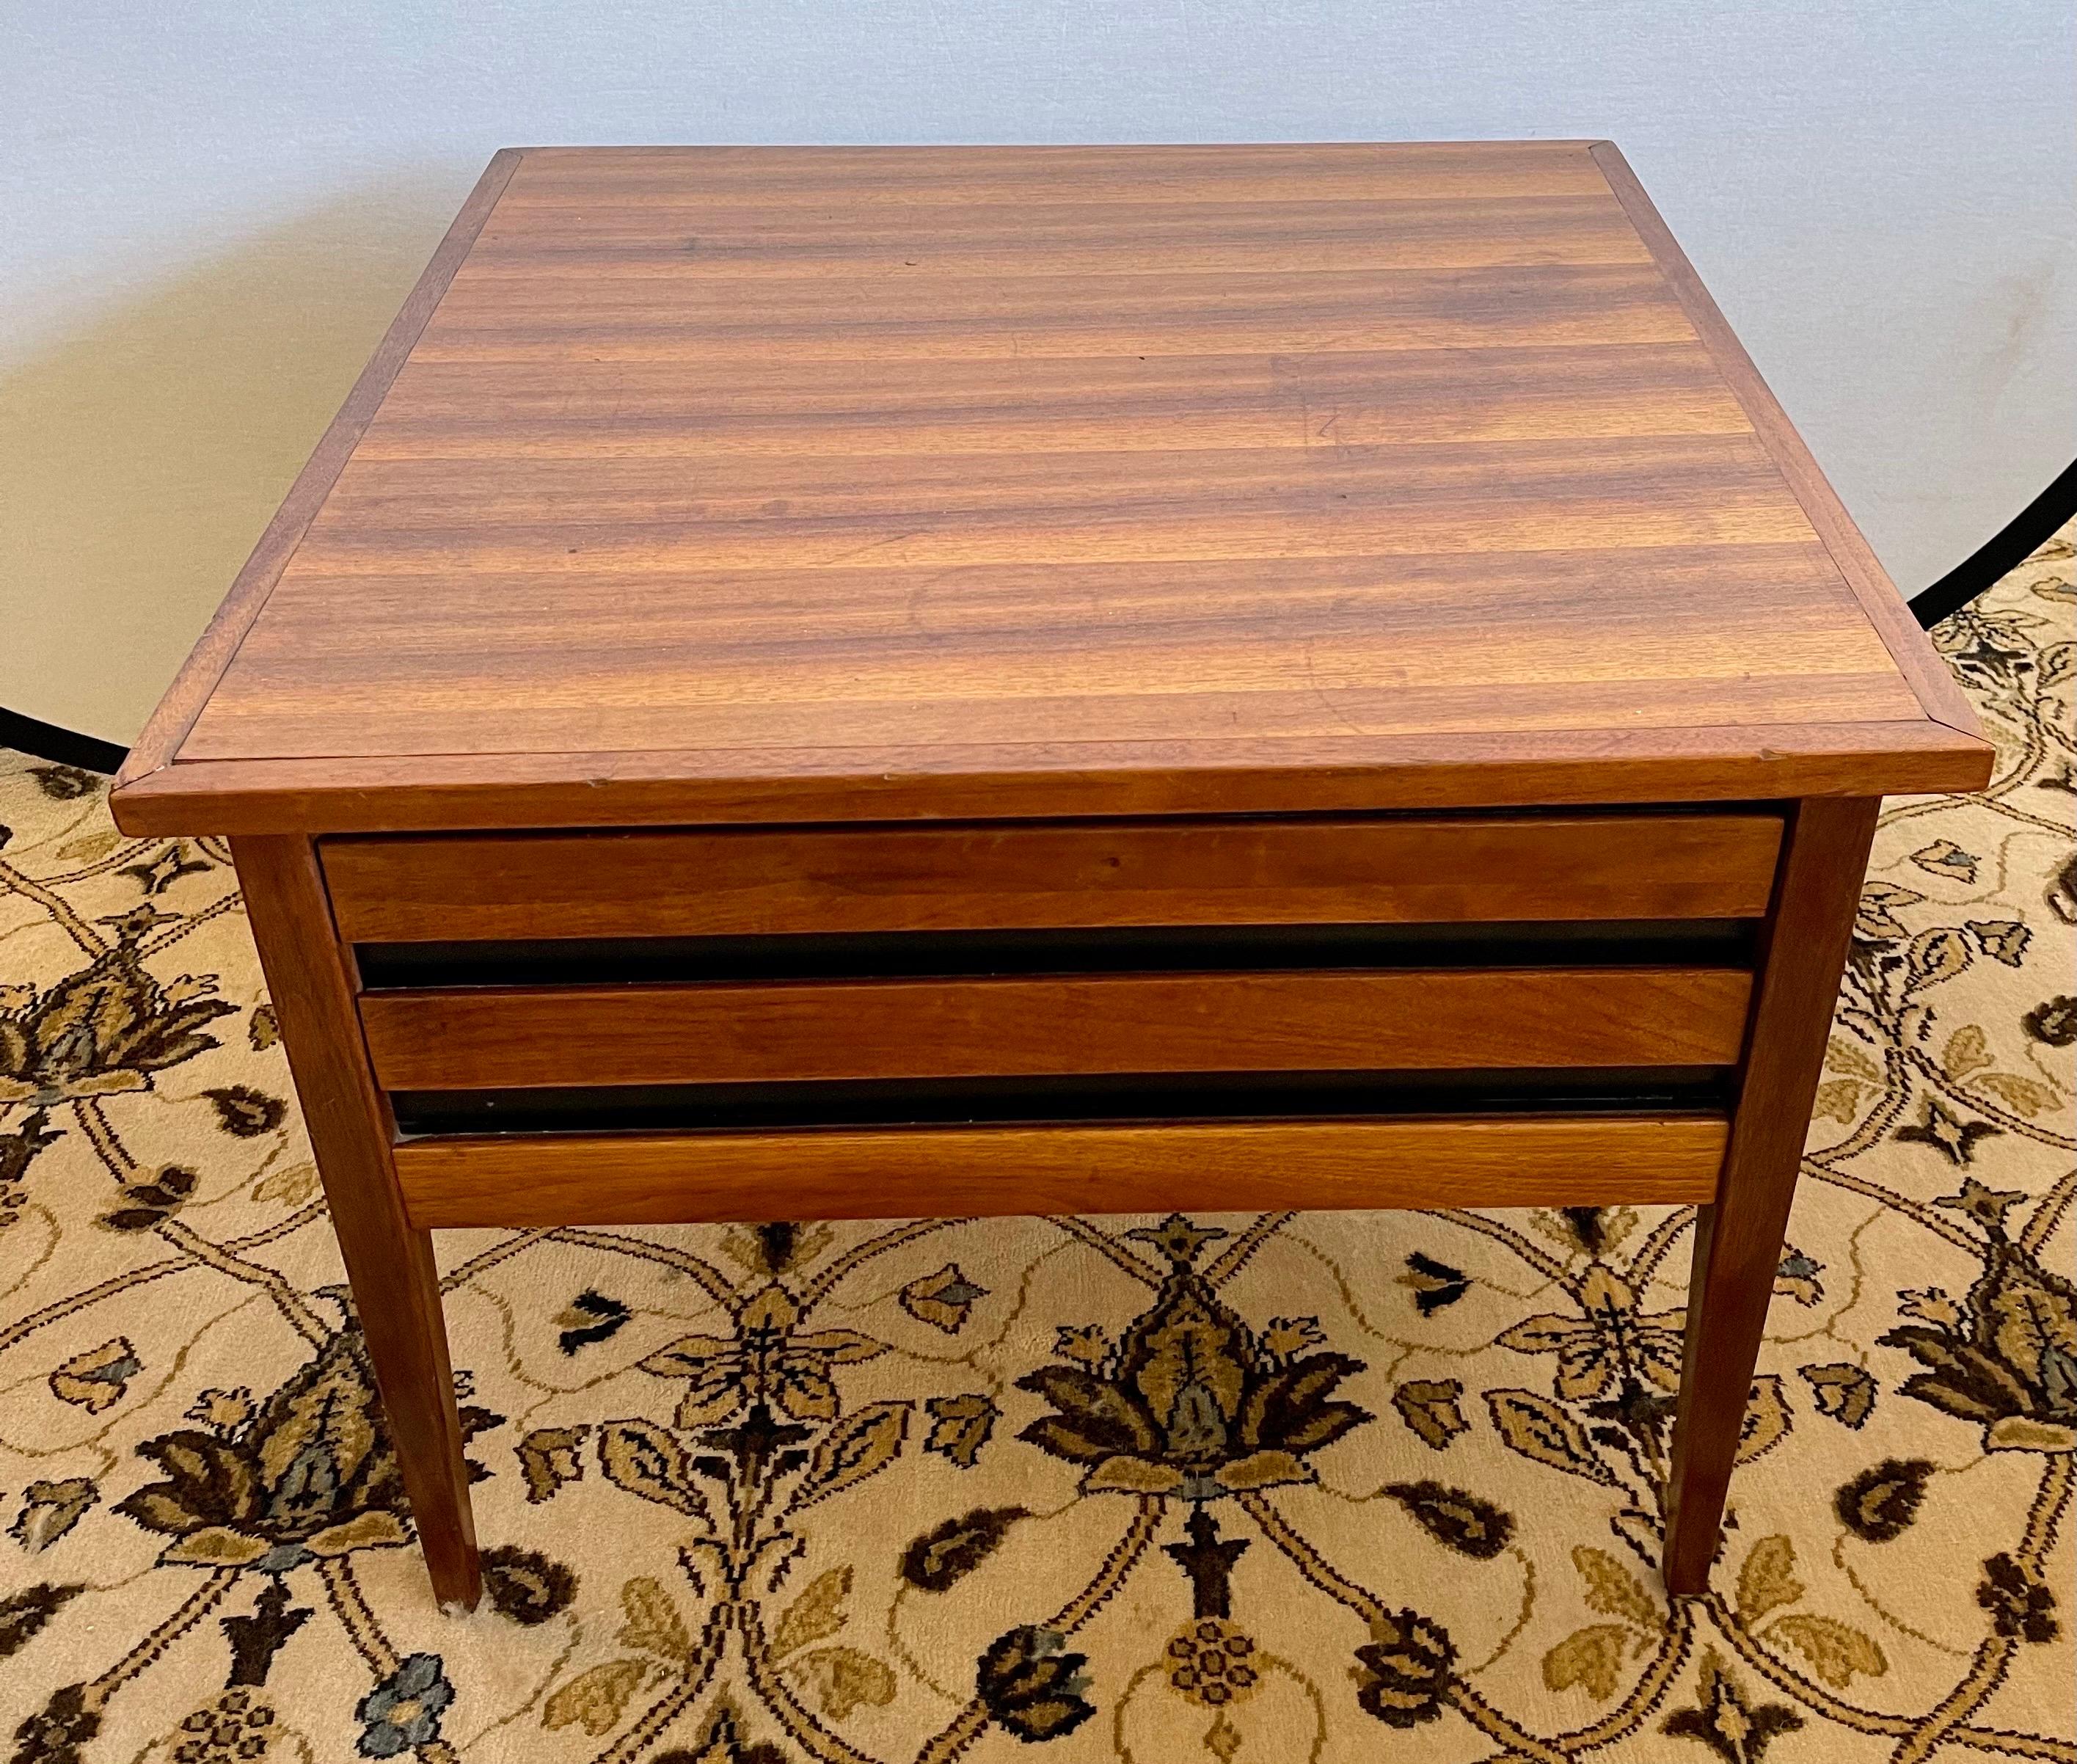 Coveted Dillingham Esprit side table with drawer designed by renowned designer Merton Gershun. Great scale and better lines. Why not own the best?.